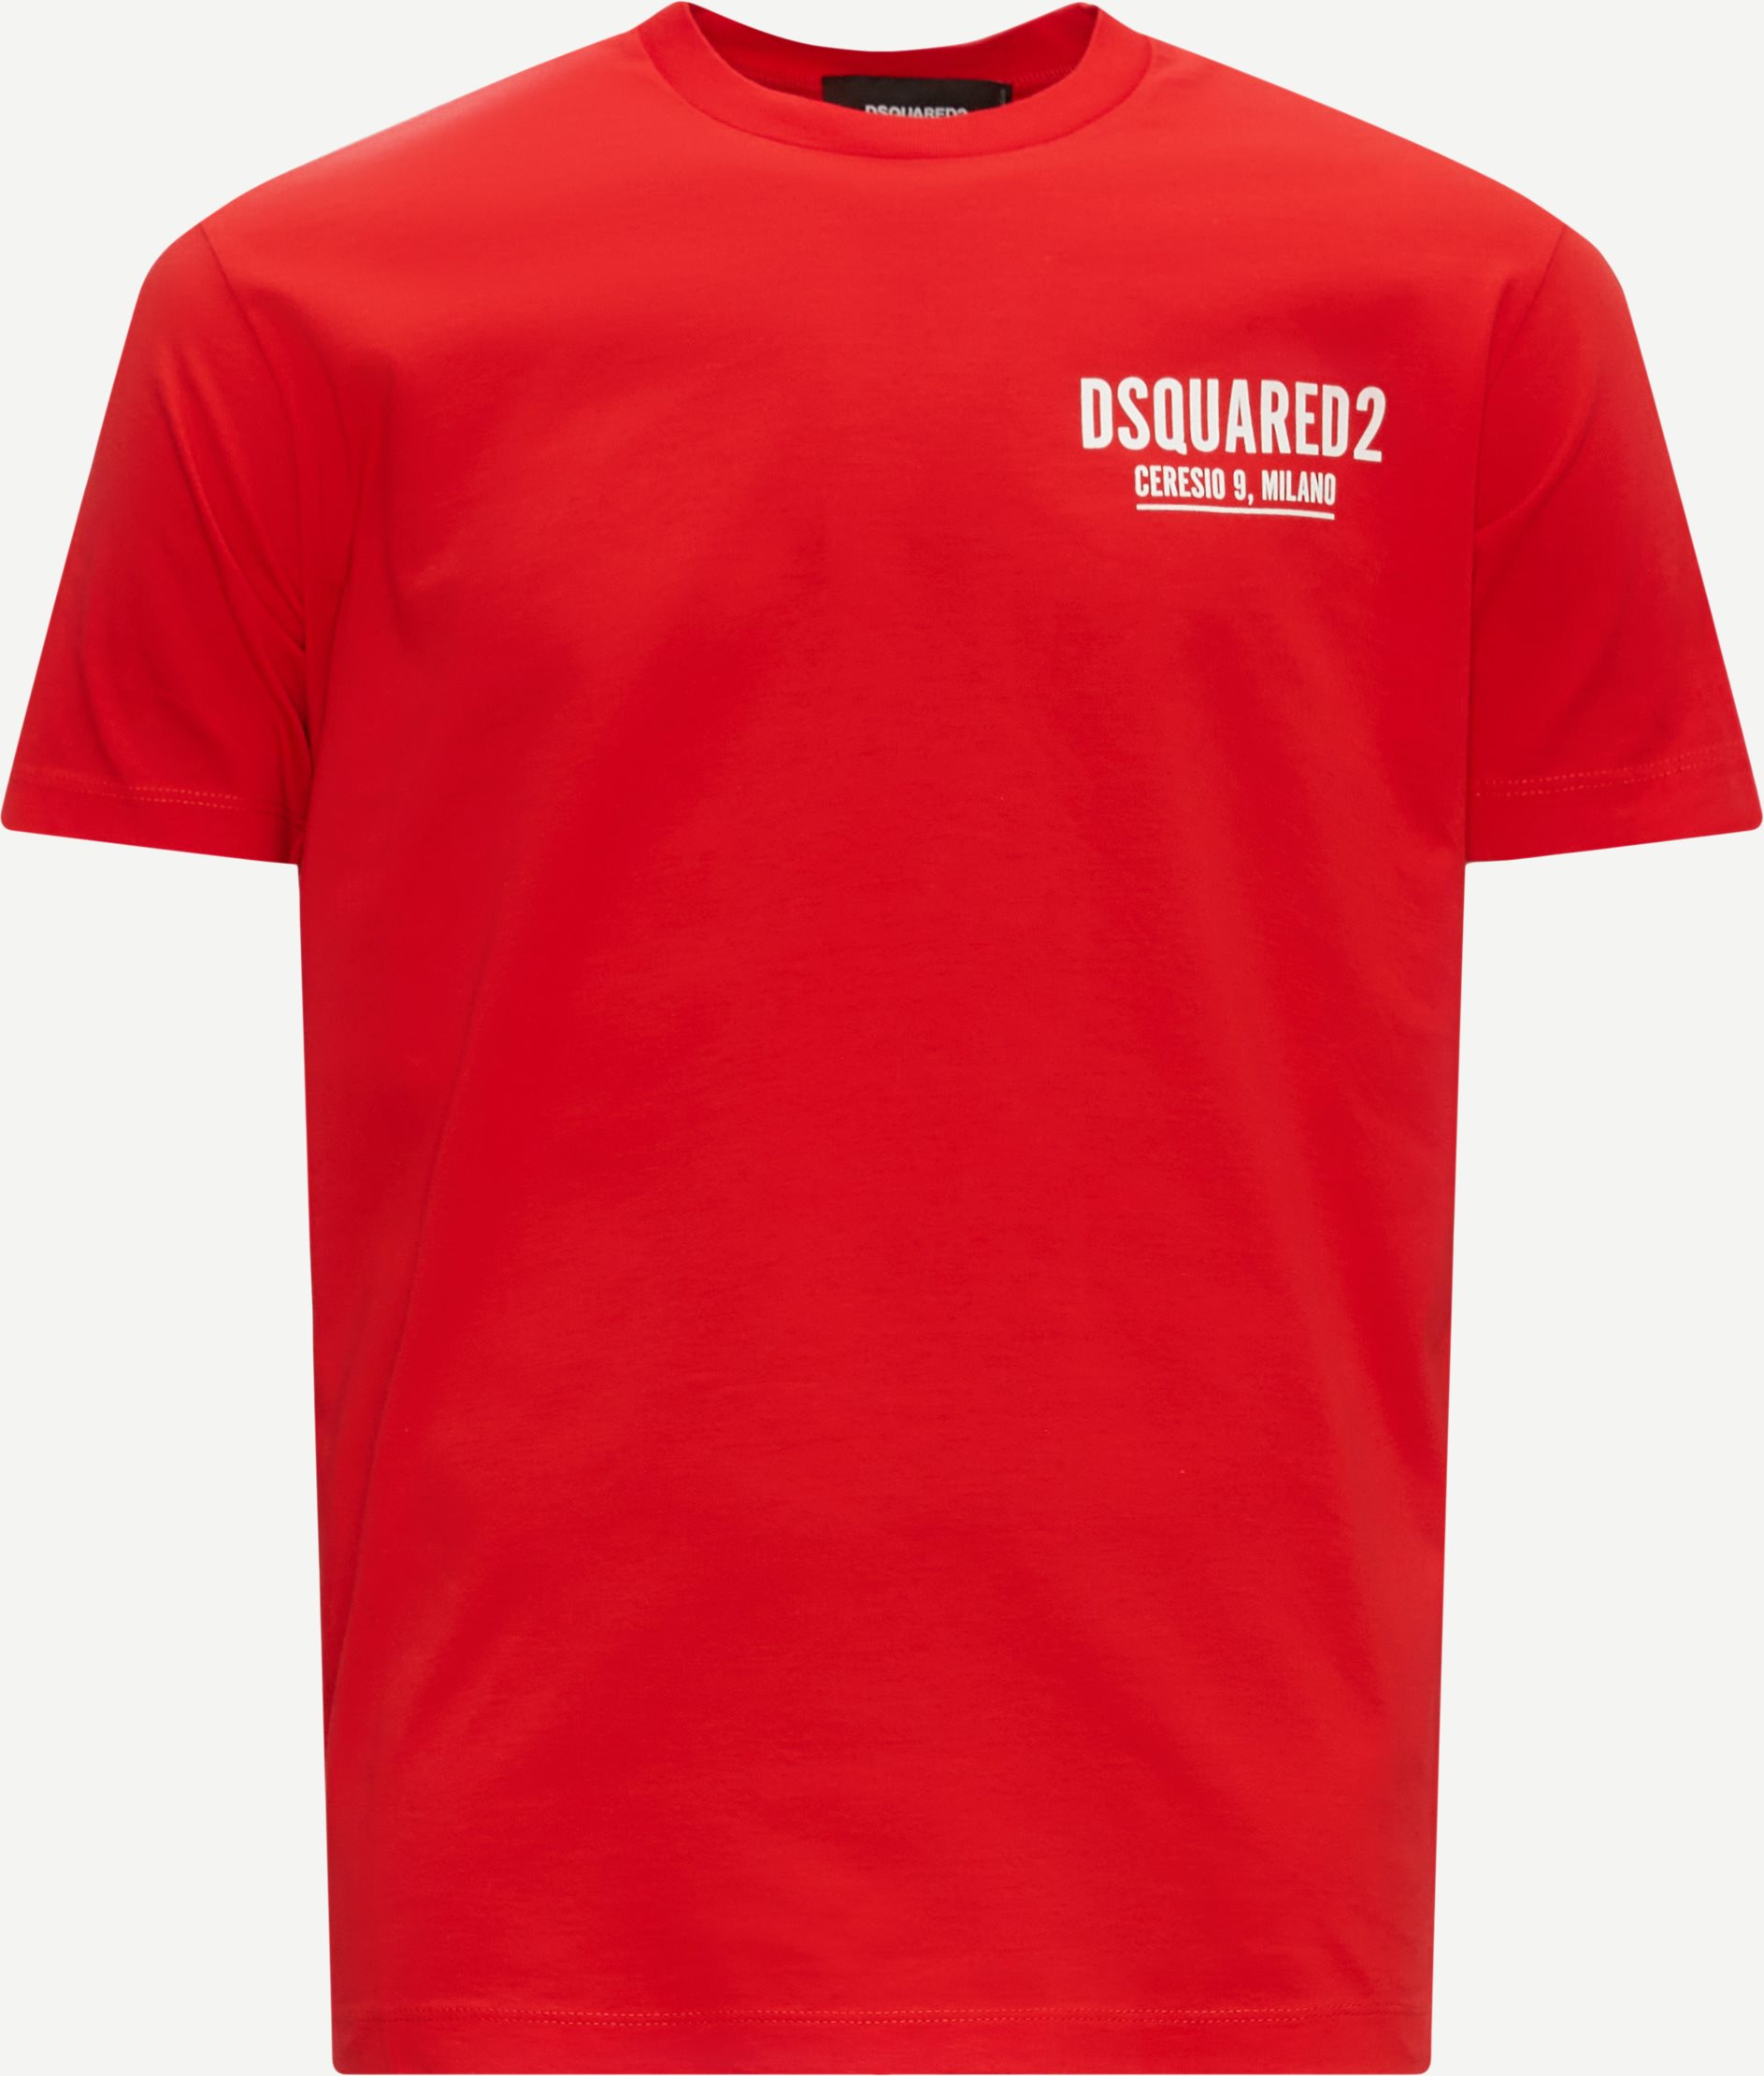 Dsquared2 T-shirts S71GD1116 S23009 Red